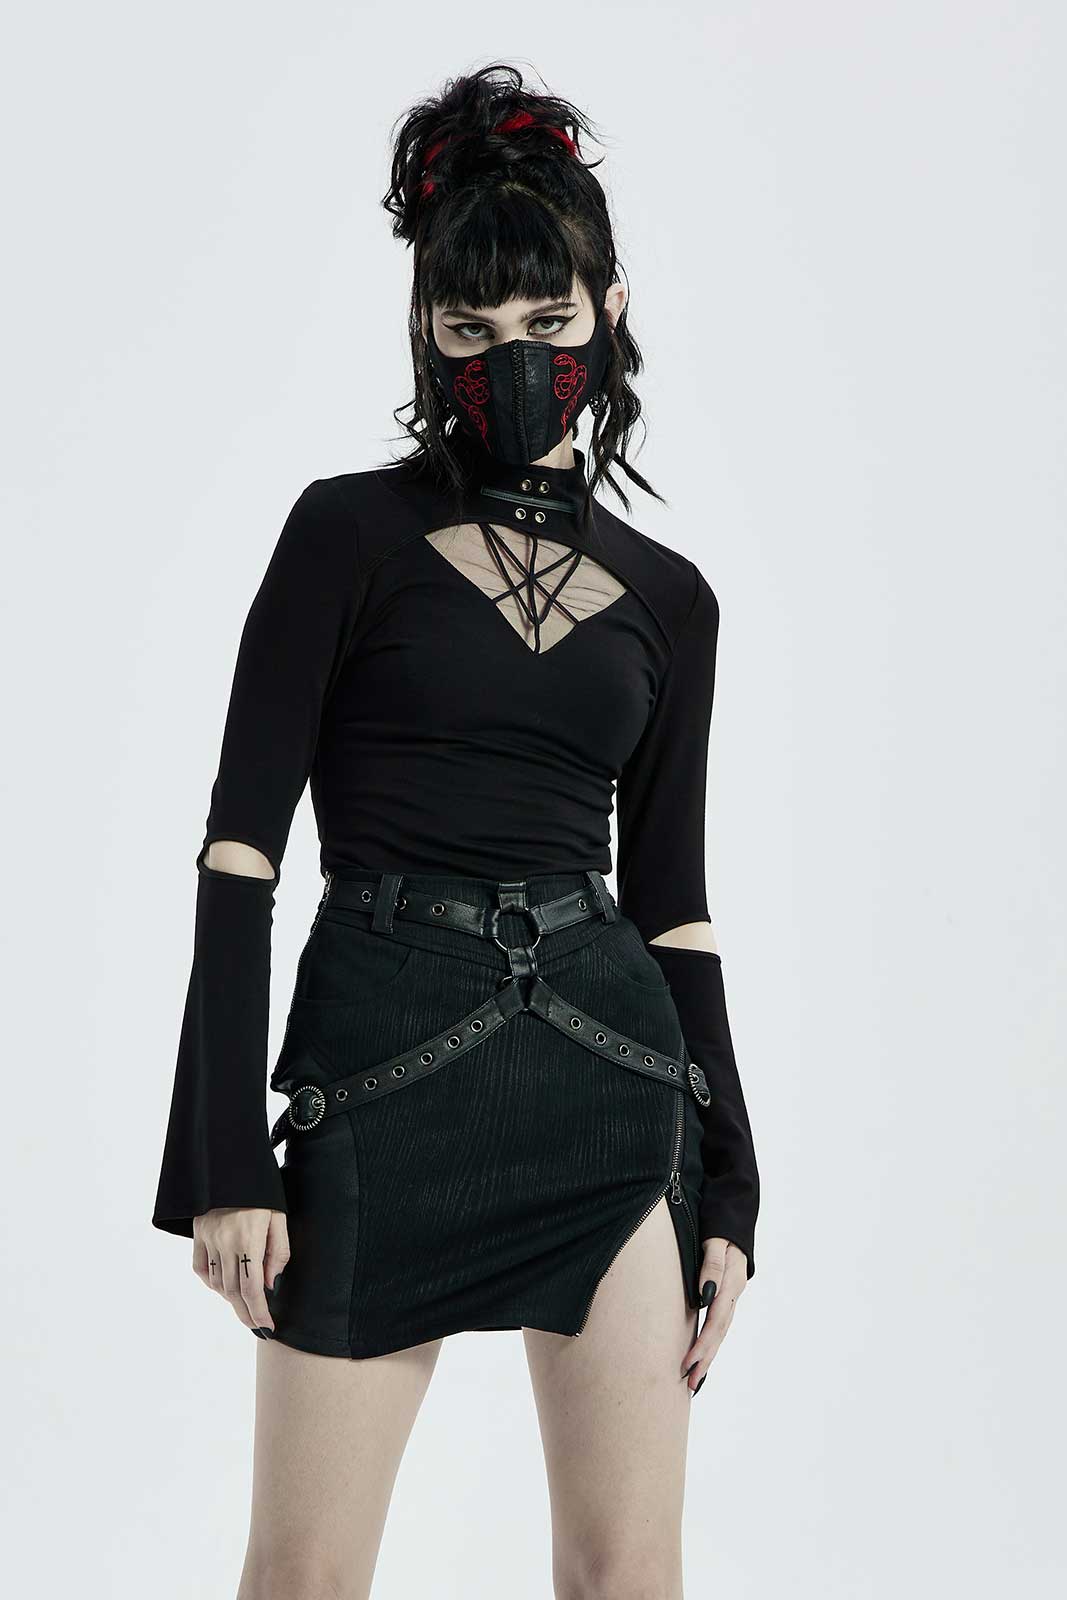 Black Gothic Punk Mask Outfit Set for Women 